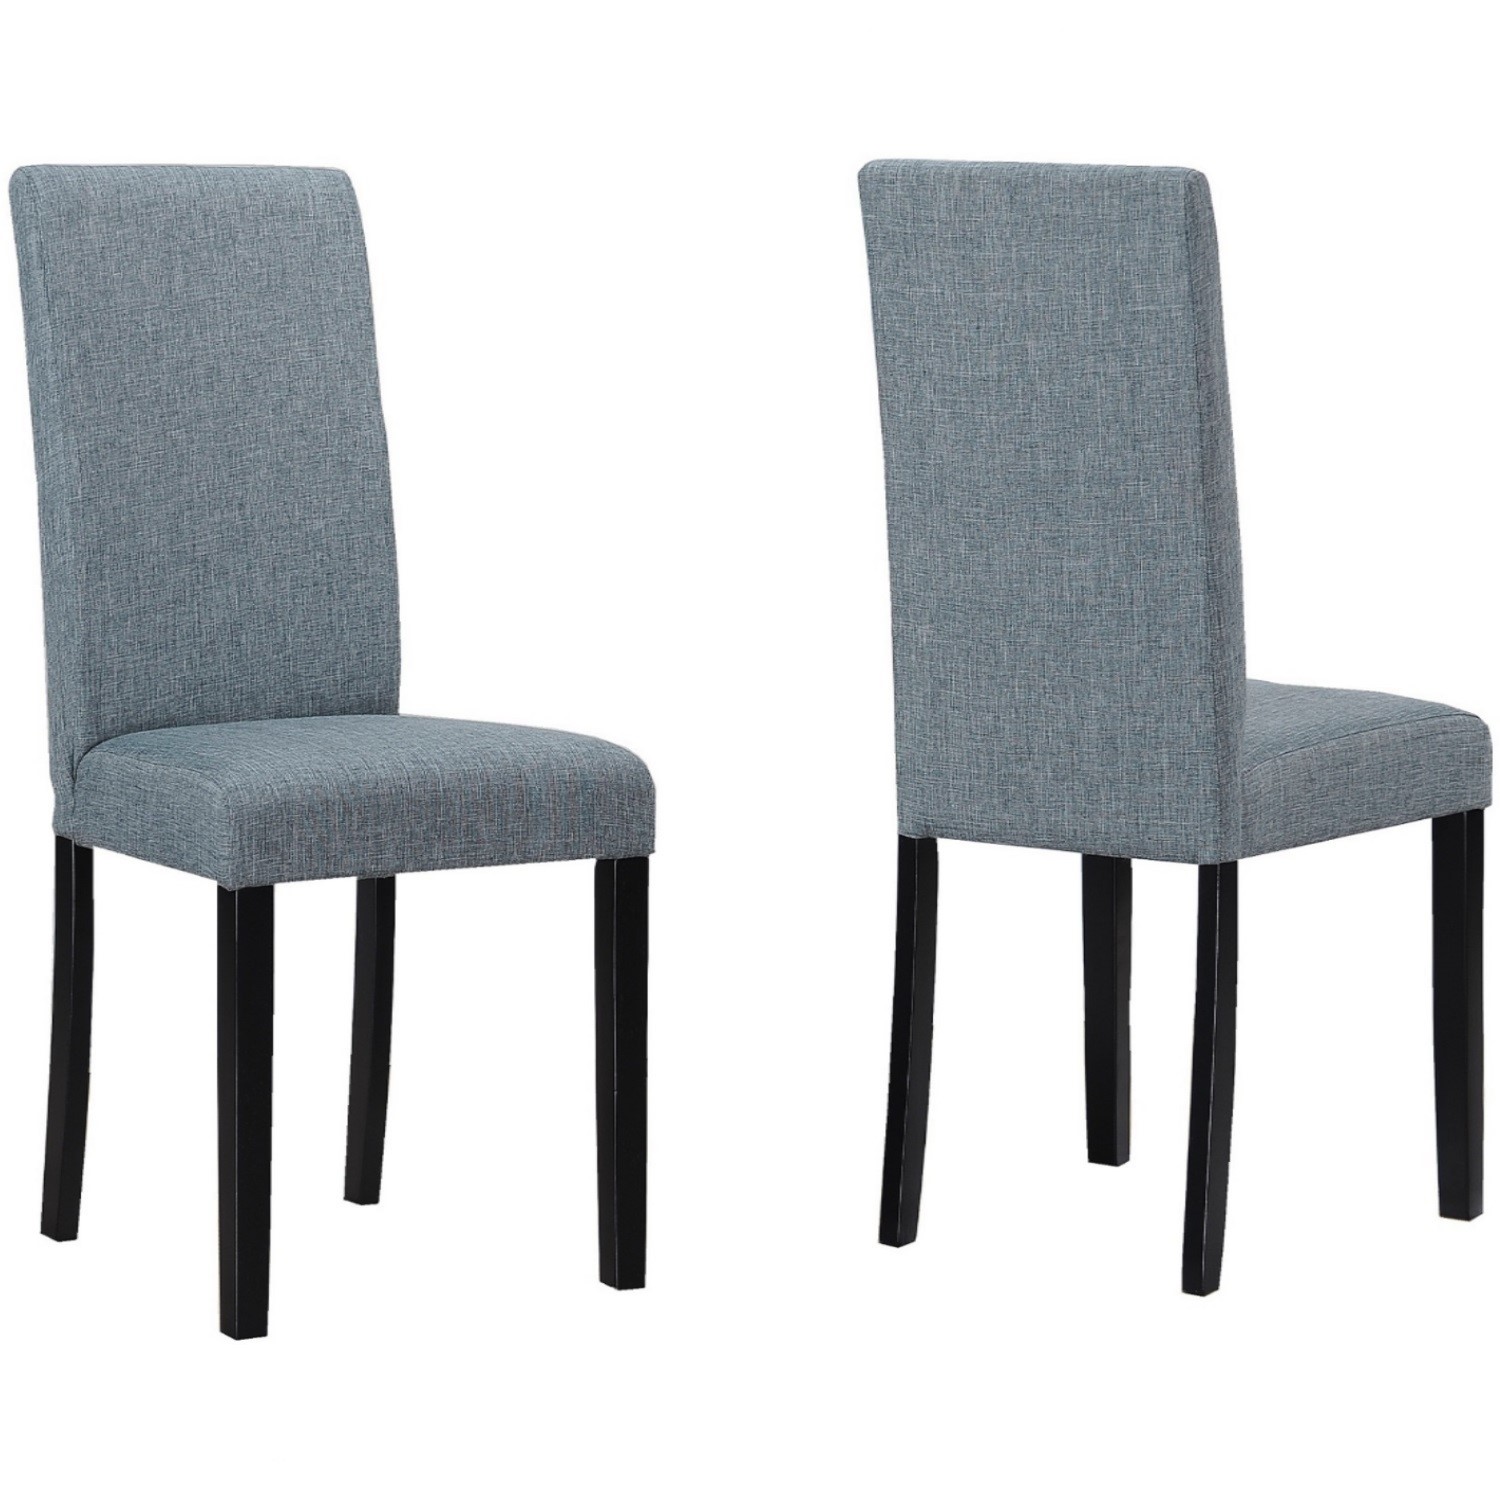 Set Of 2 Slate Grey Dining Chairs With, Dark Grey Fabric Dining Chairs With Black Legs